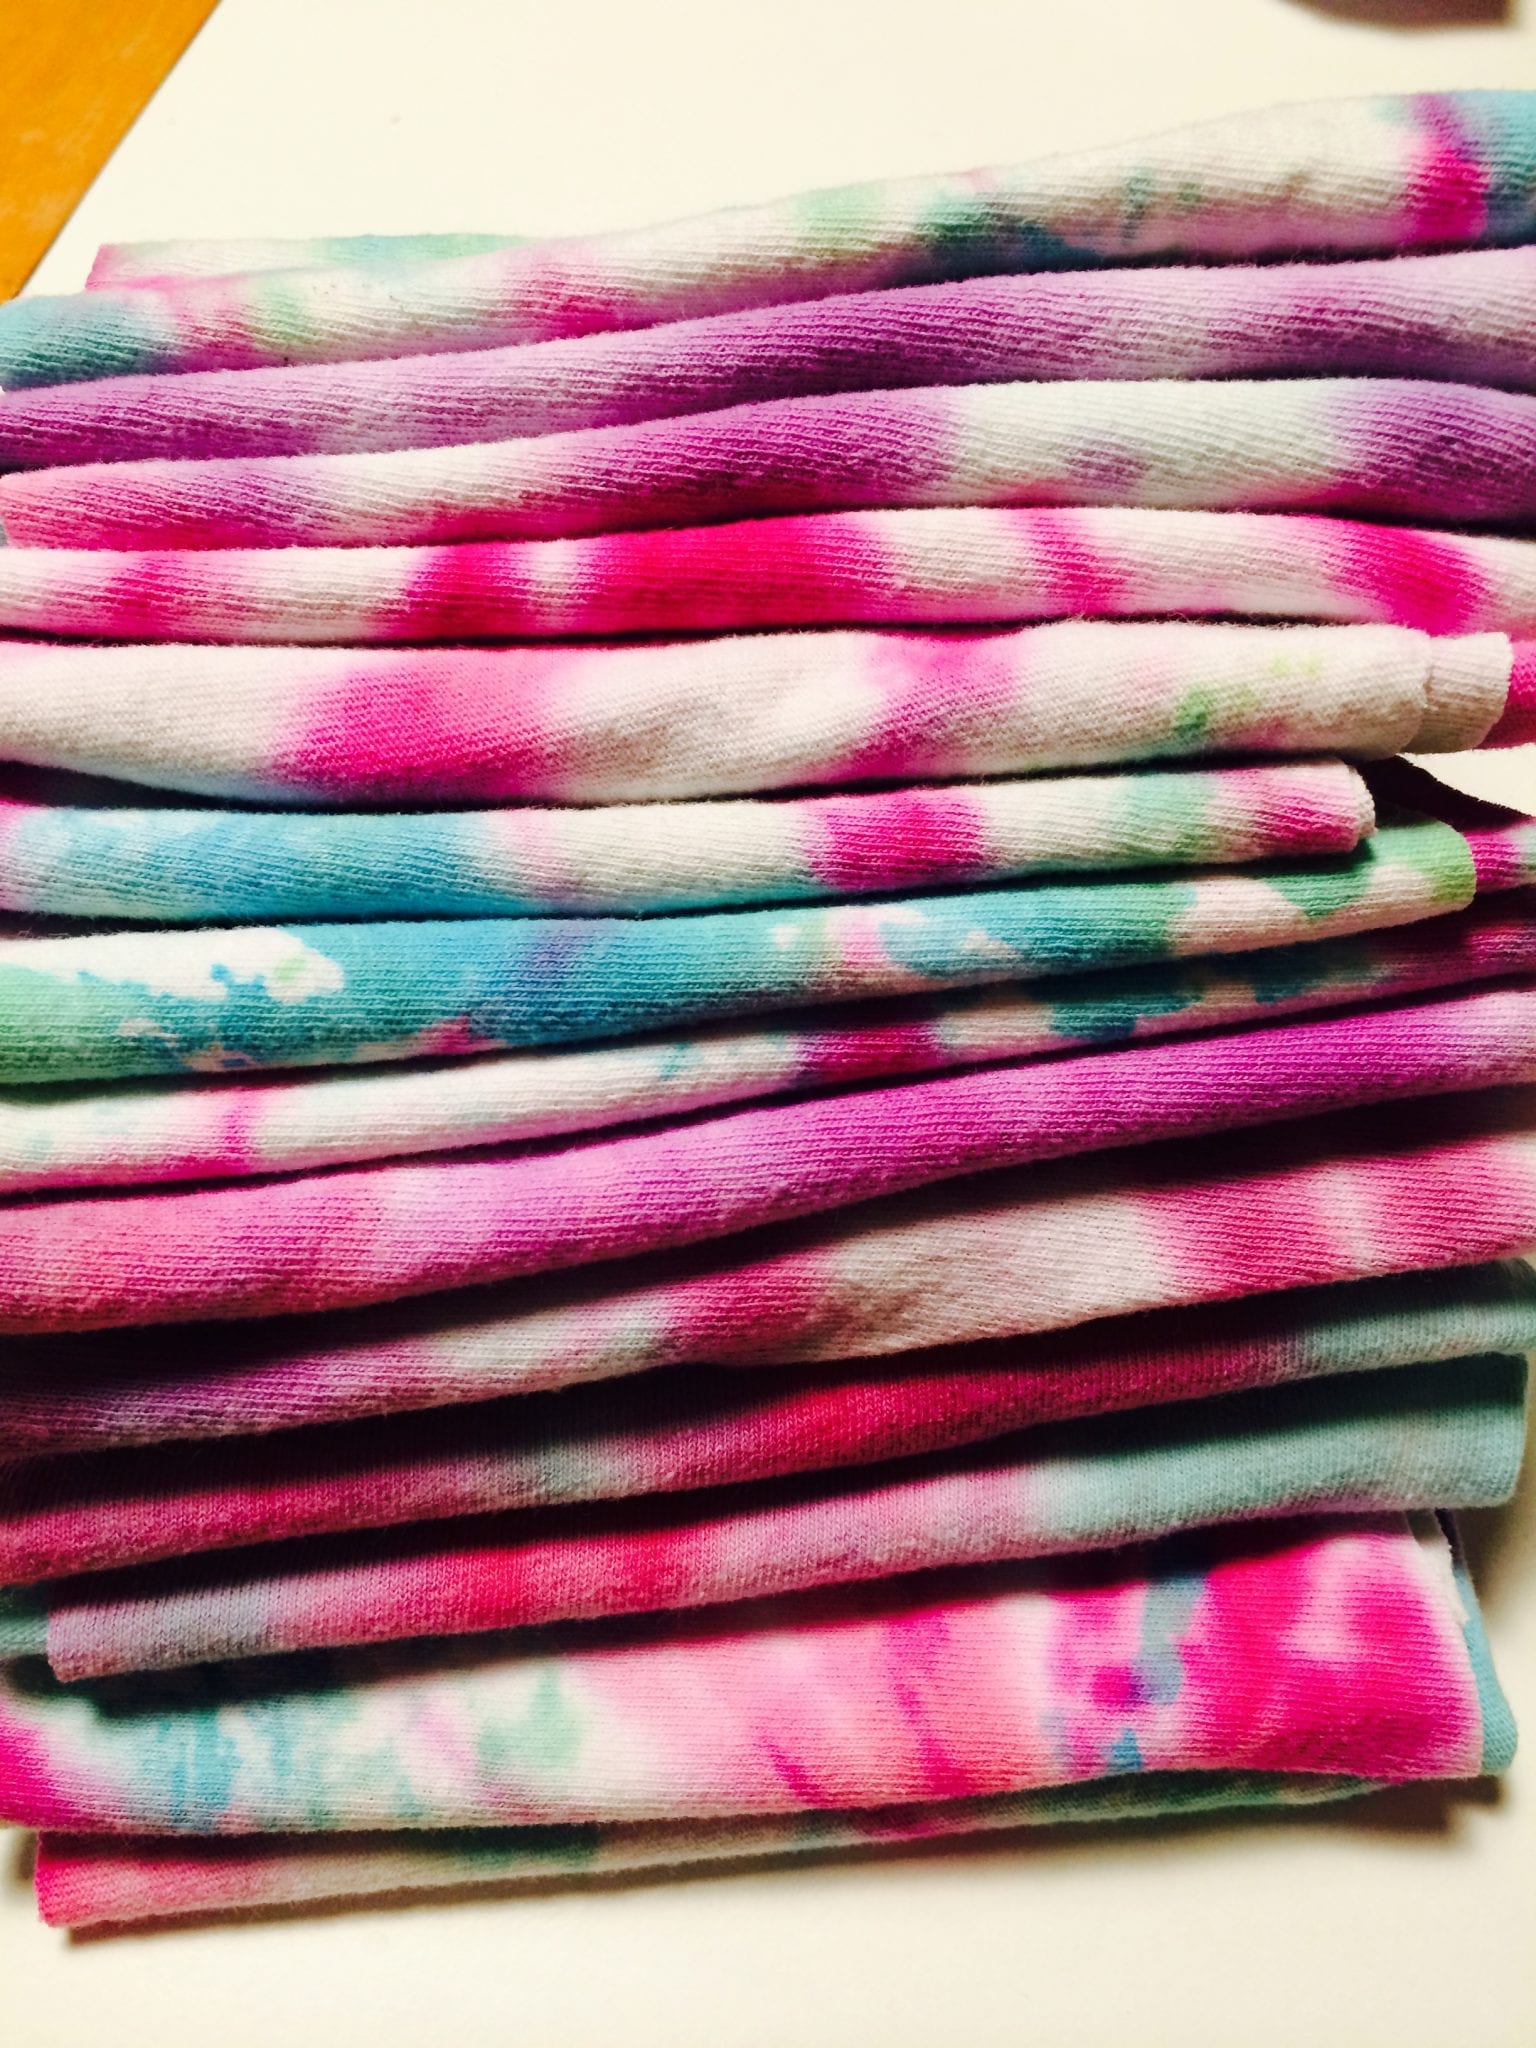 How To Repurpose Cotton T-Shirts into Cleaning Rags - Modern Day Moms